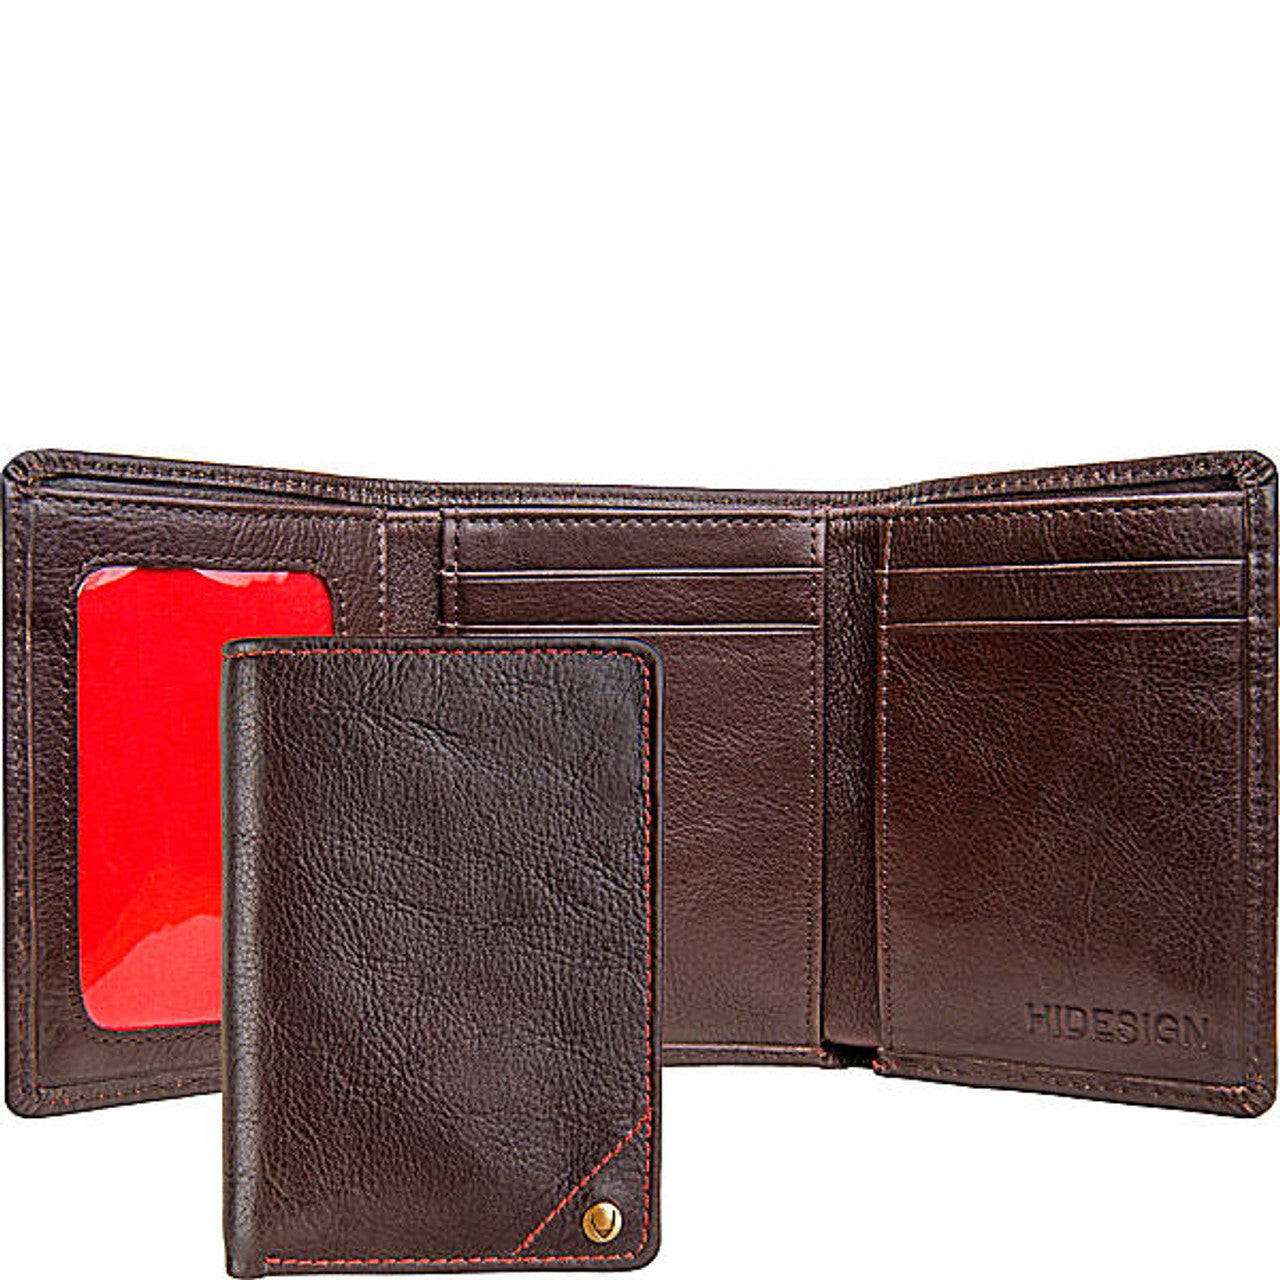 Angle Stitch Leather Slim Trifold Wallet - Leather Loom